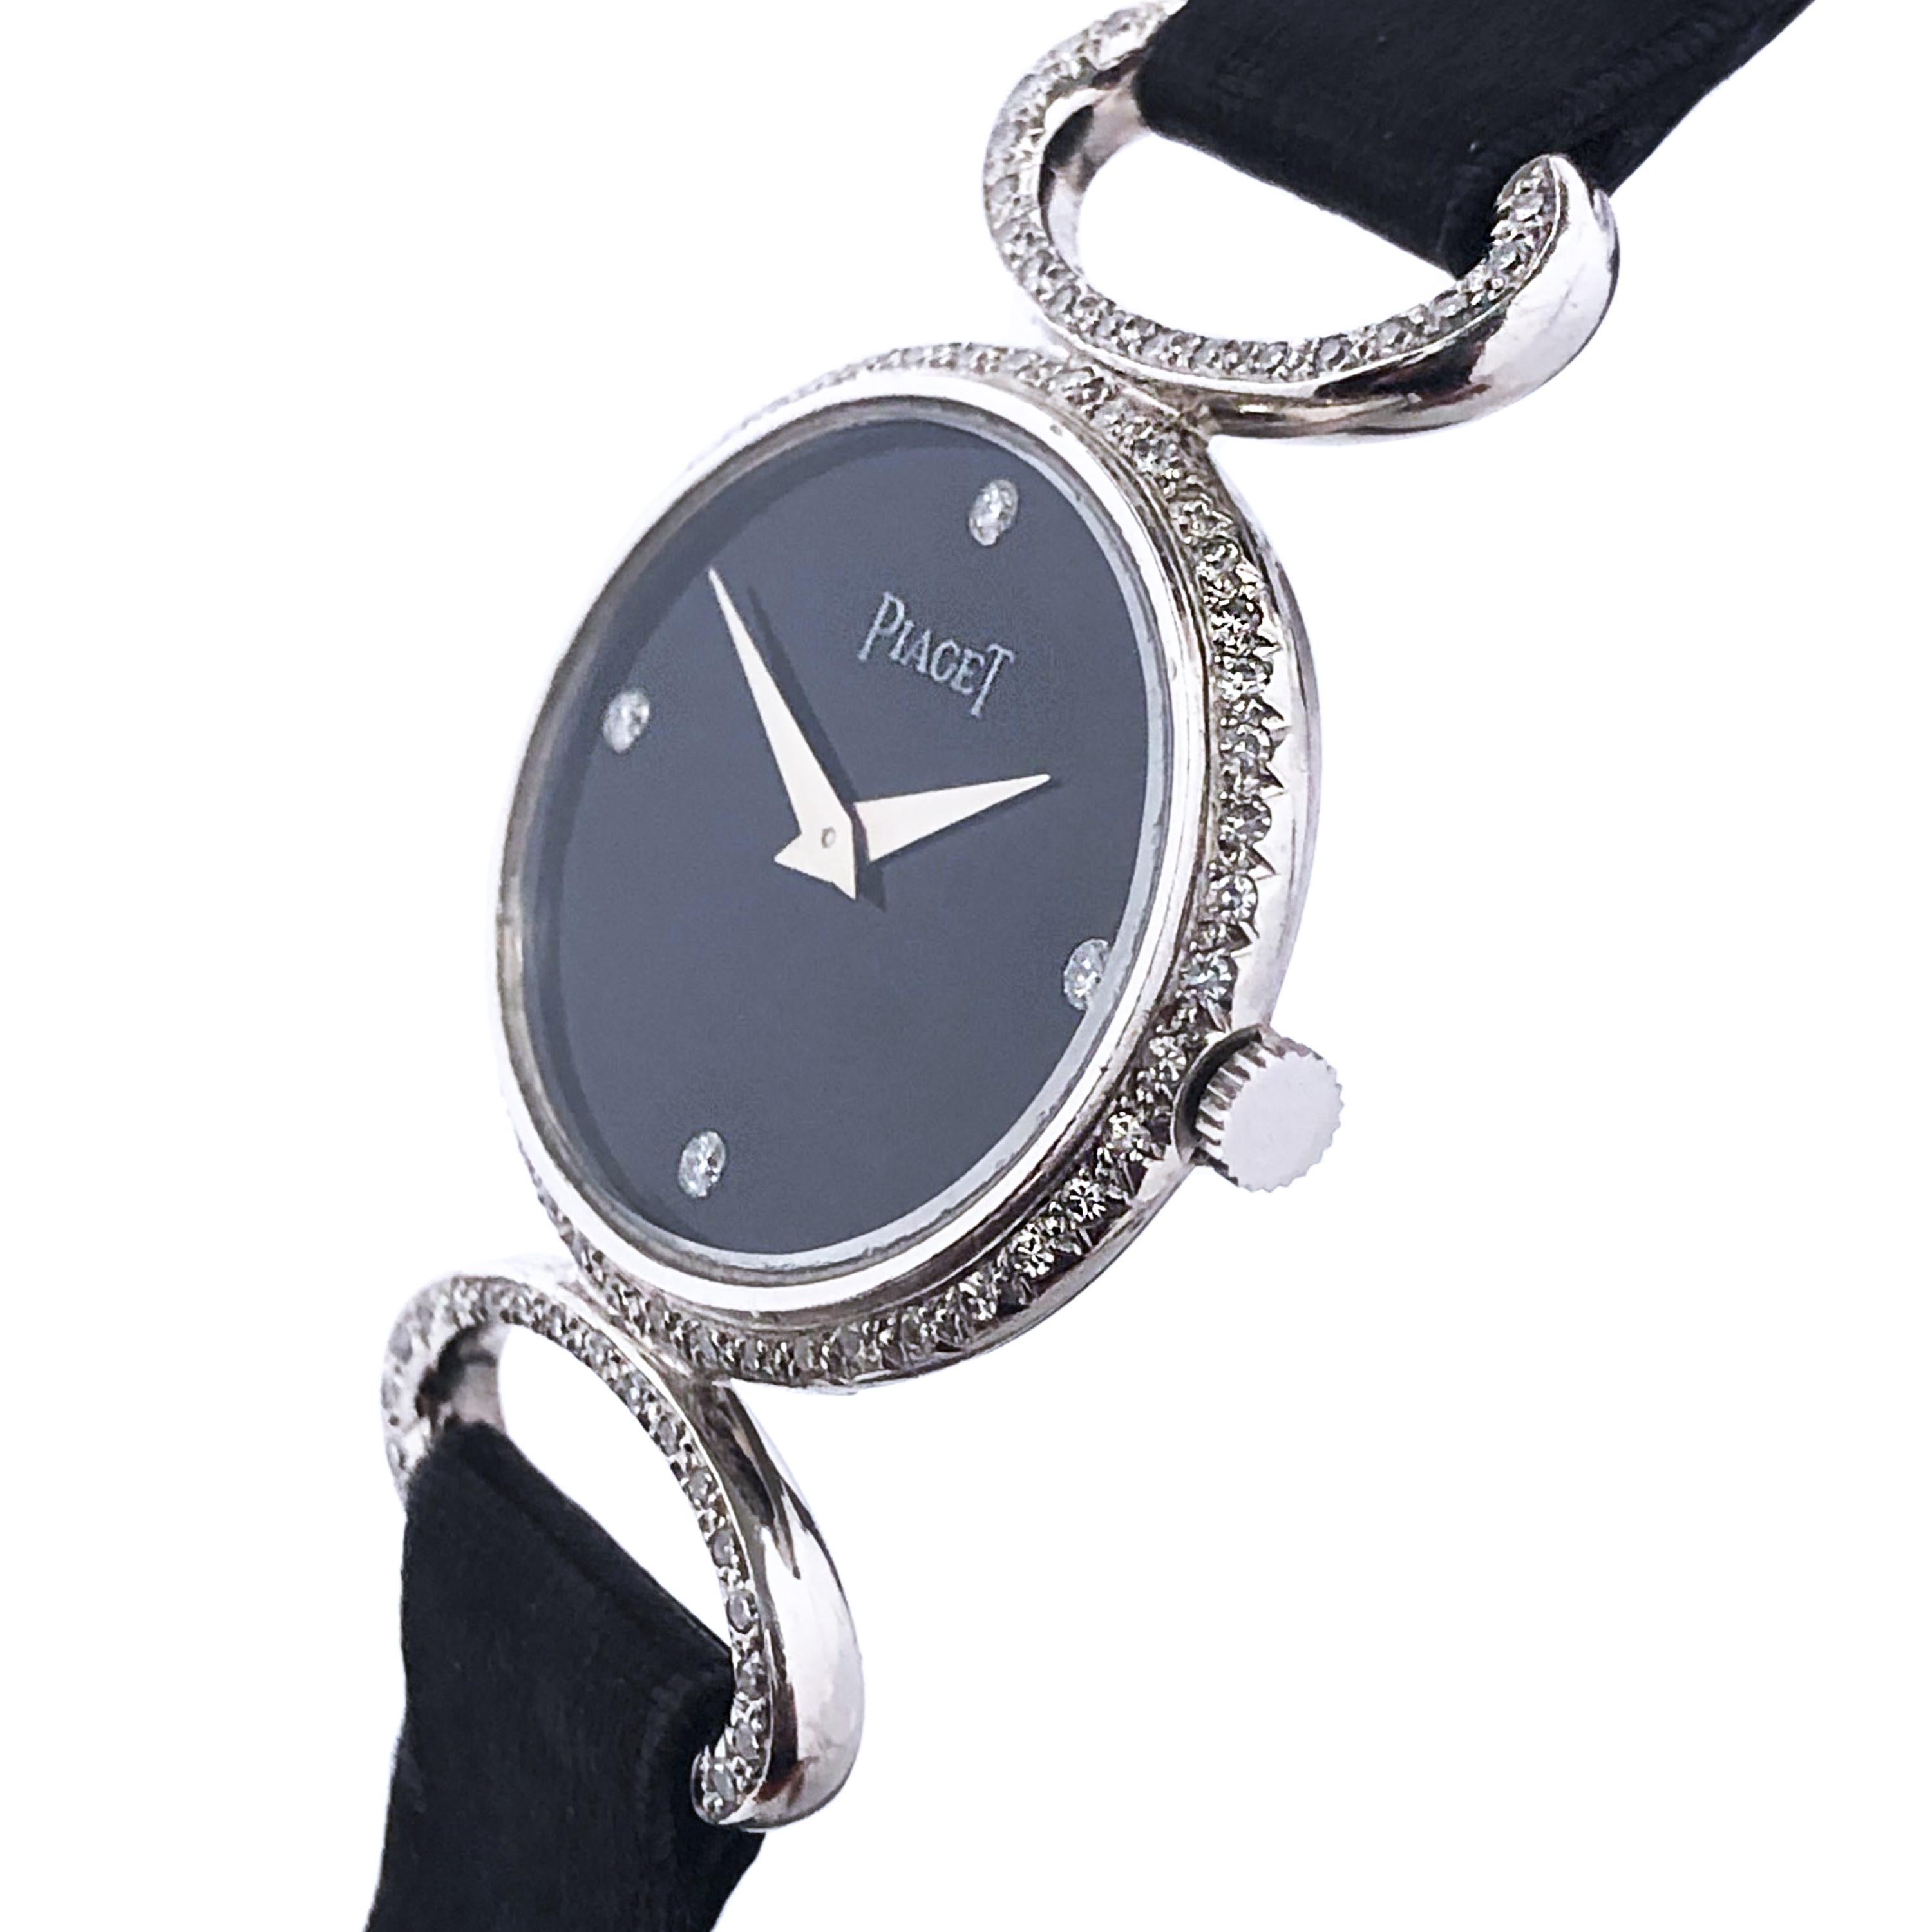 Circa 1980 Piaget Ladies Wrist watch, 27 X 22 MM Oval 2 Piece 18K White Gold case, 17 jewel Manual wind movement, Black Onyx Dial with Diamond set markers. White Gold and Diamond set Bracelet sections between original Black Satin strap sections.